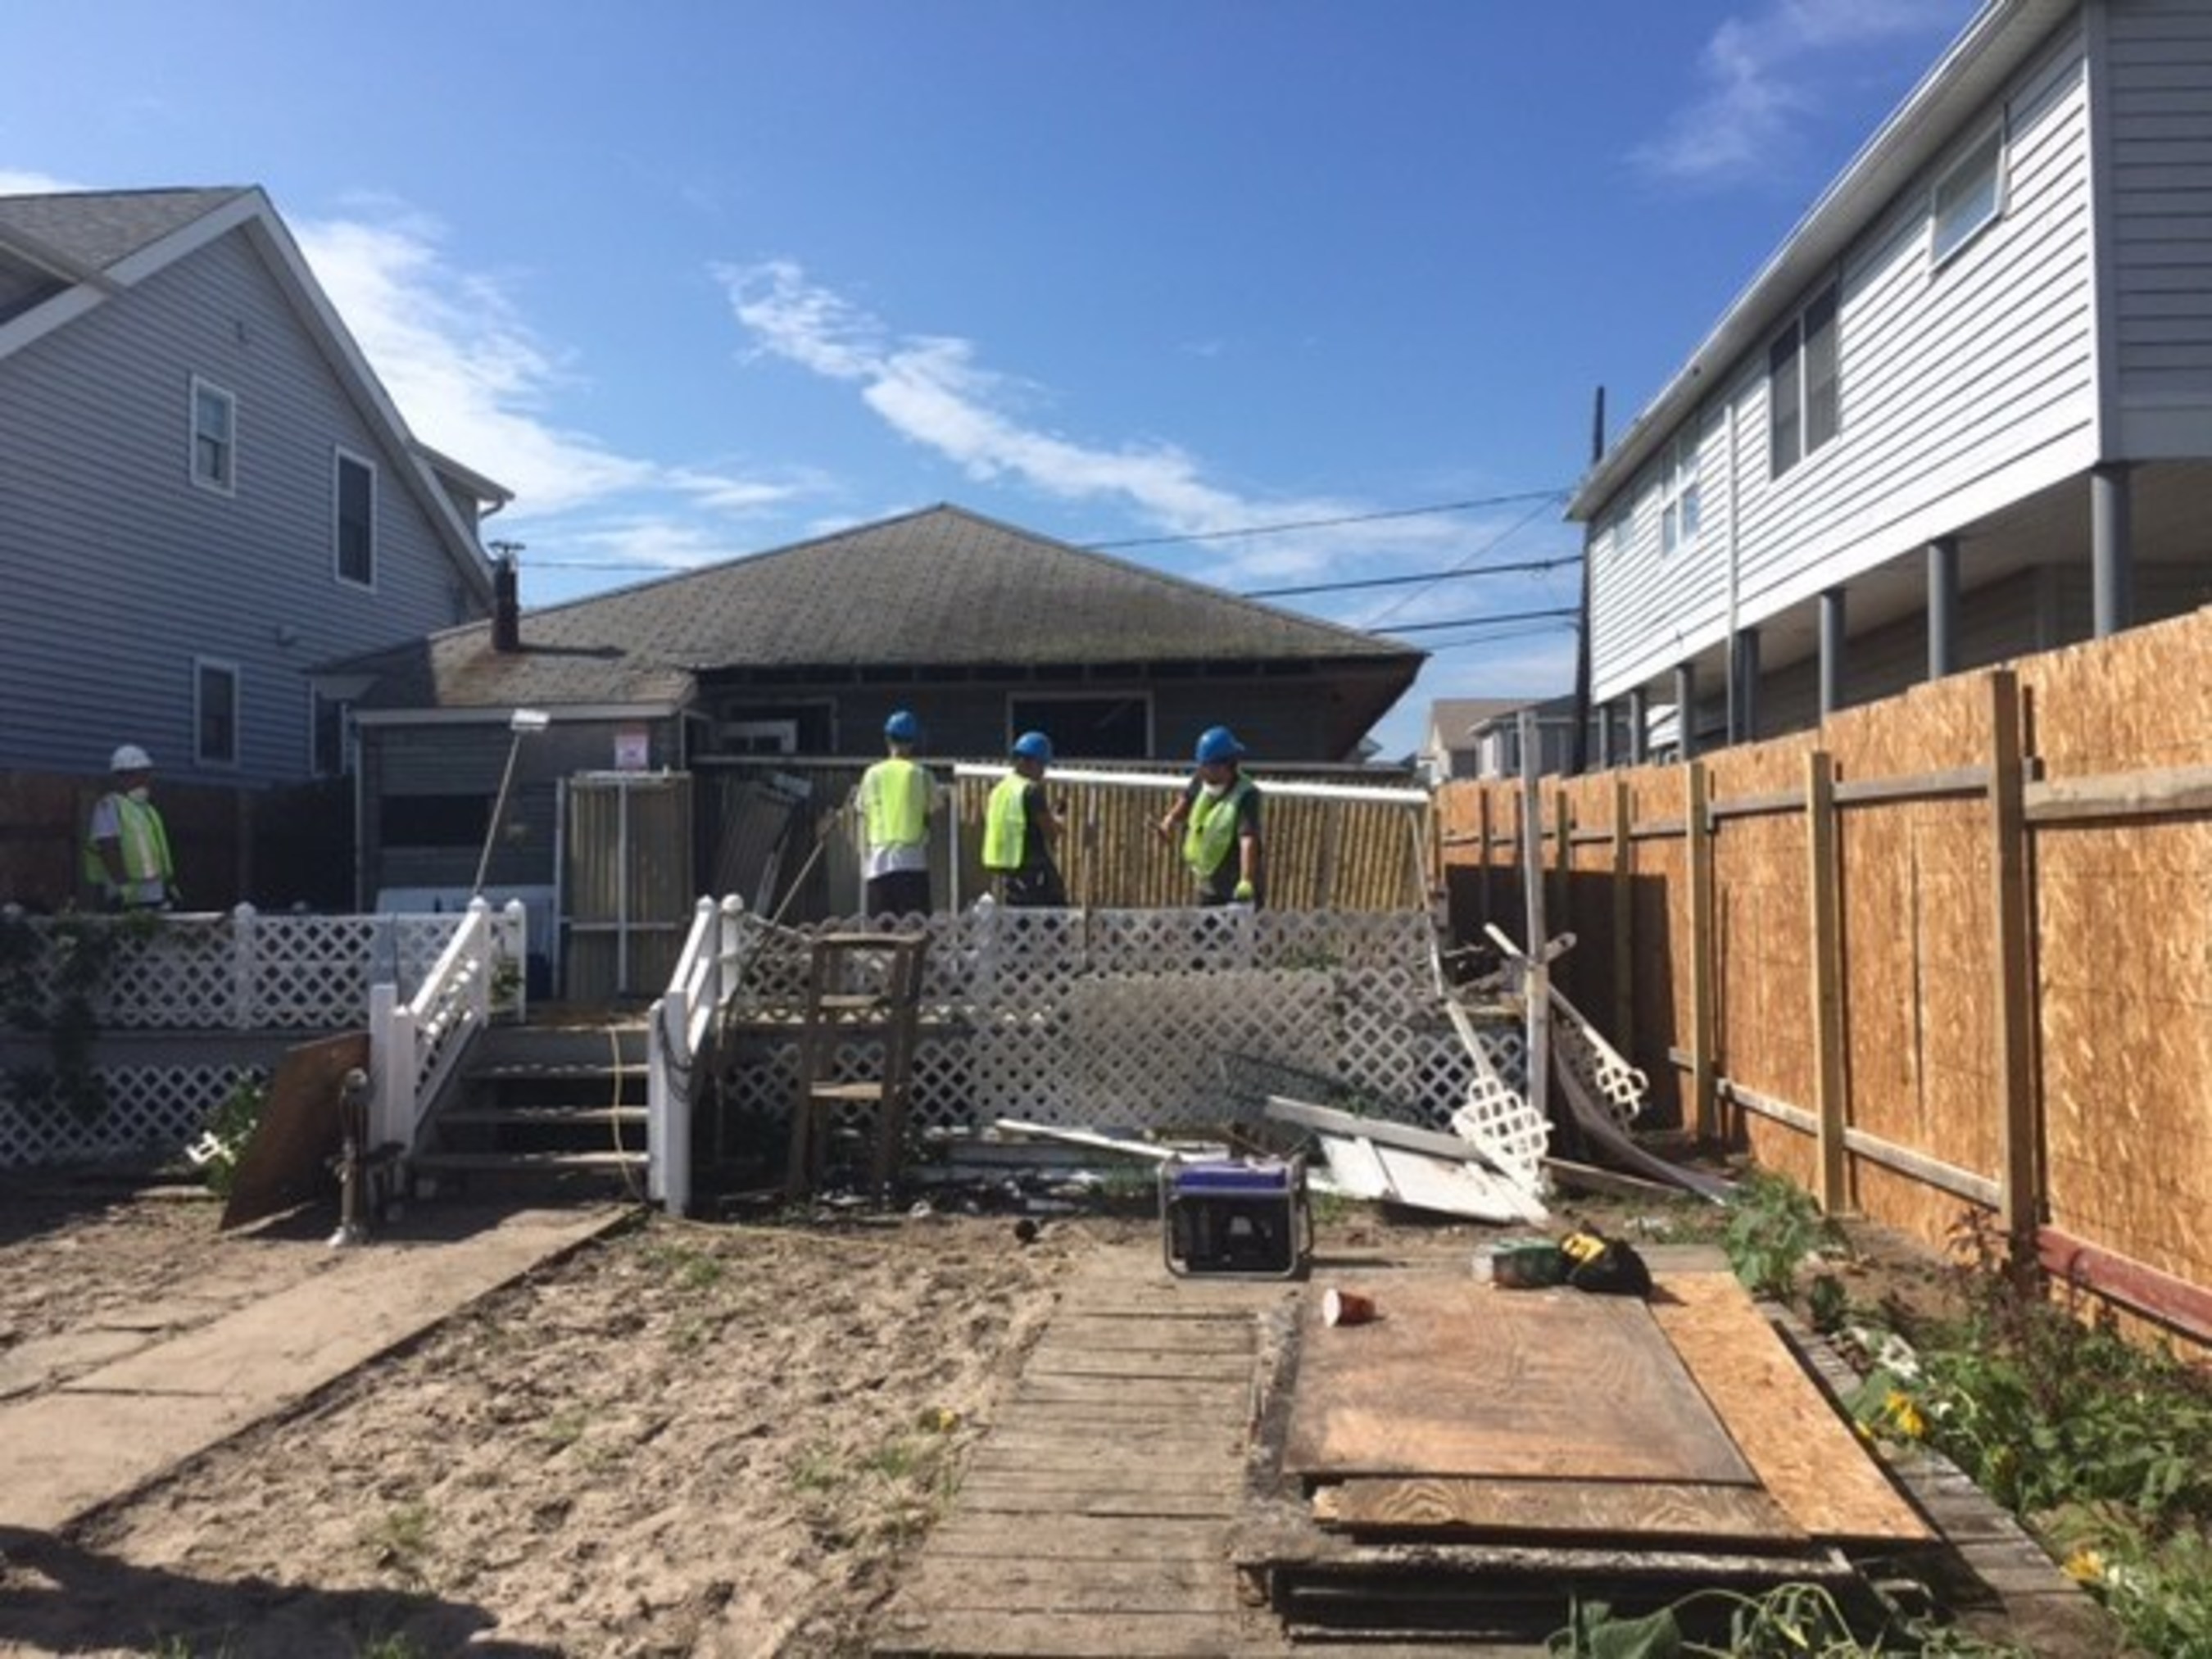 Demo Day in Breezy Point